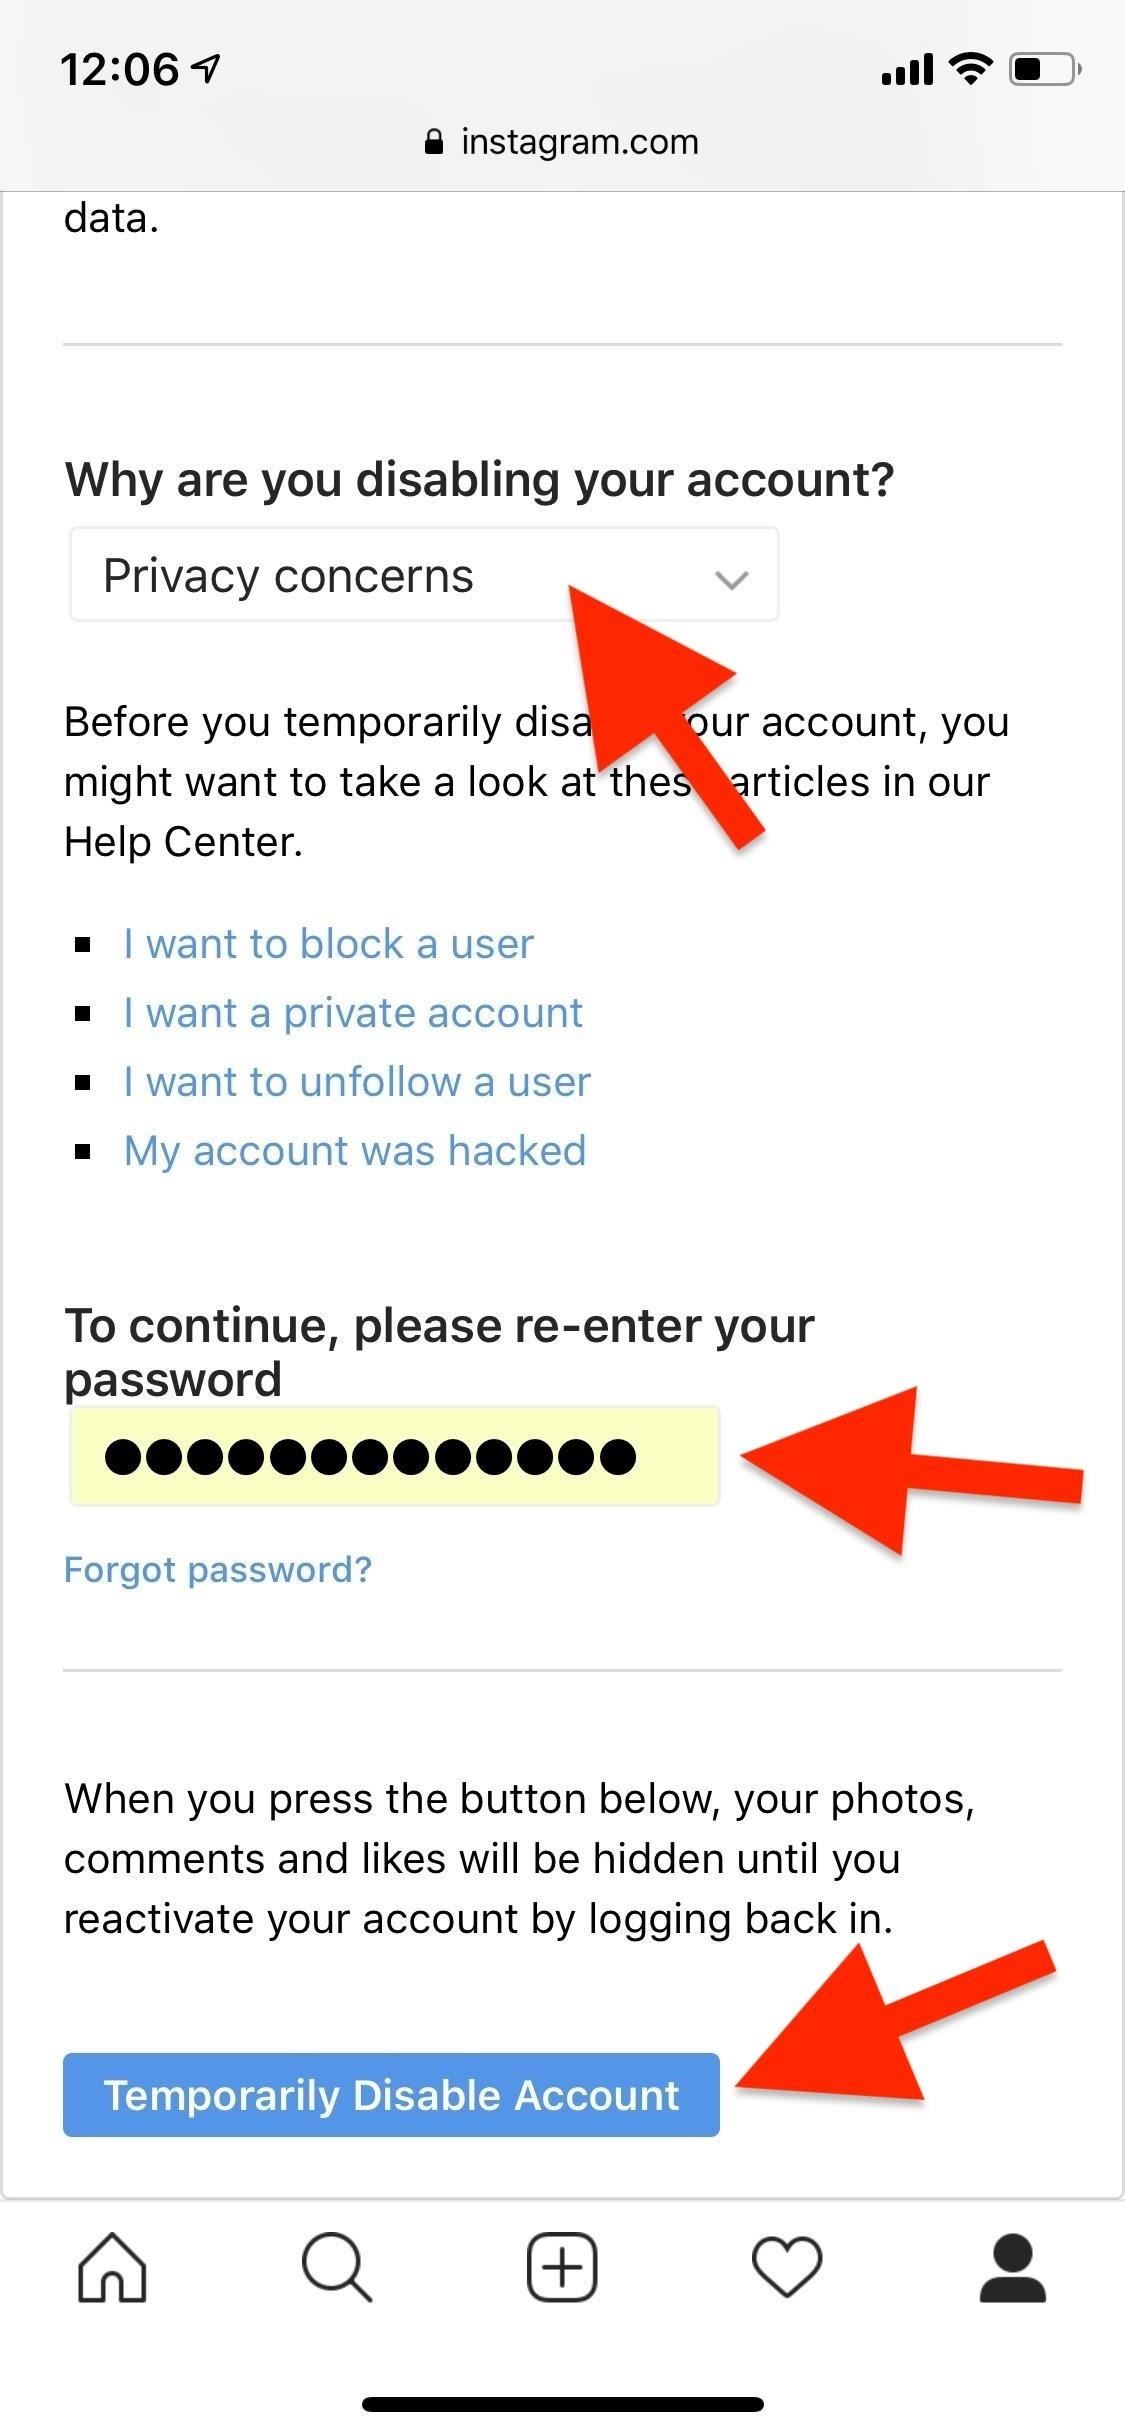 How to Temporarily Disable Your Instagram Account When You Need to